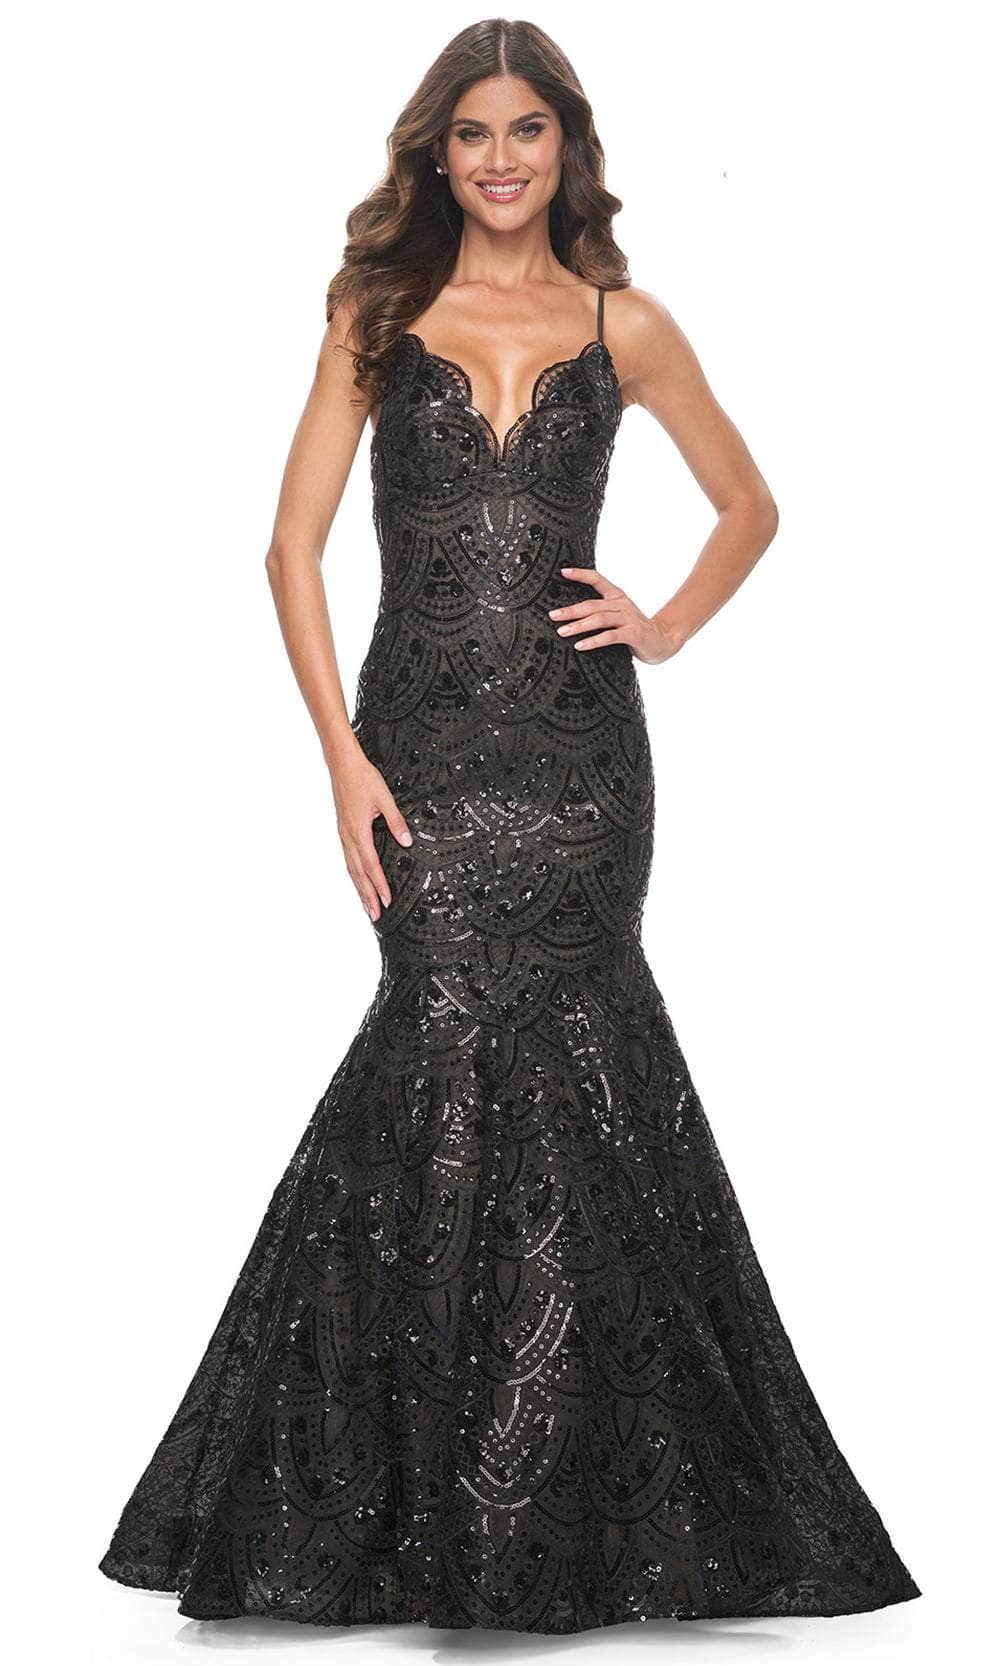 Image of La Femme 32118 - Sequin Sleeveless Prom Gown